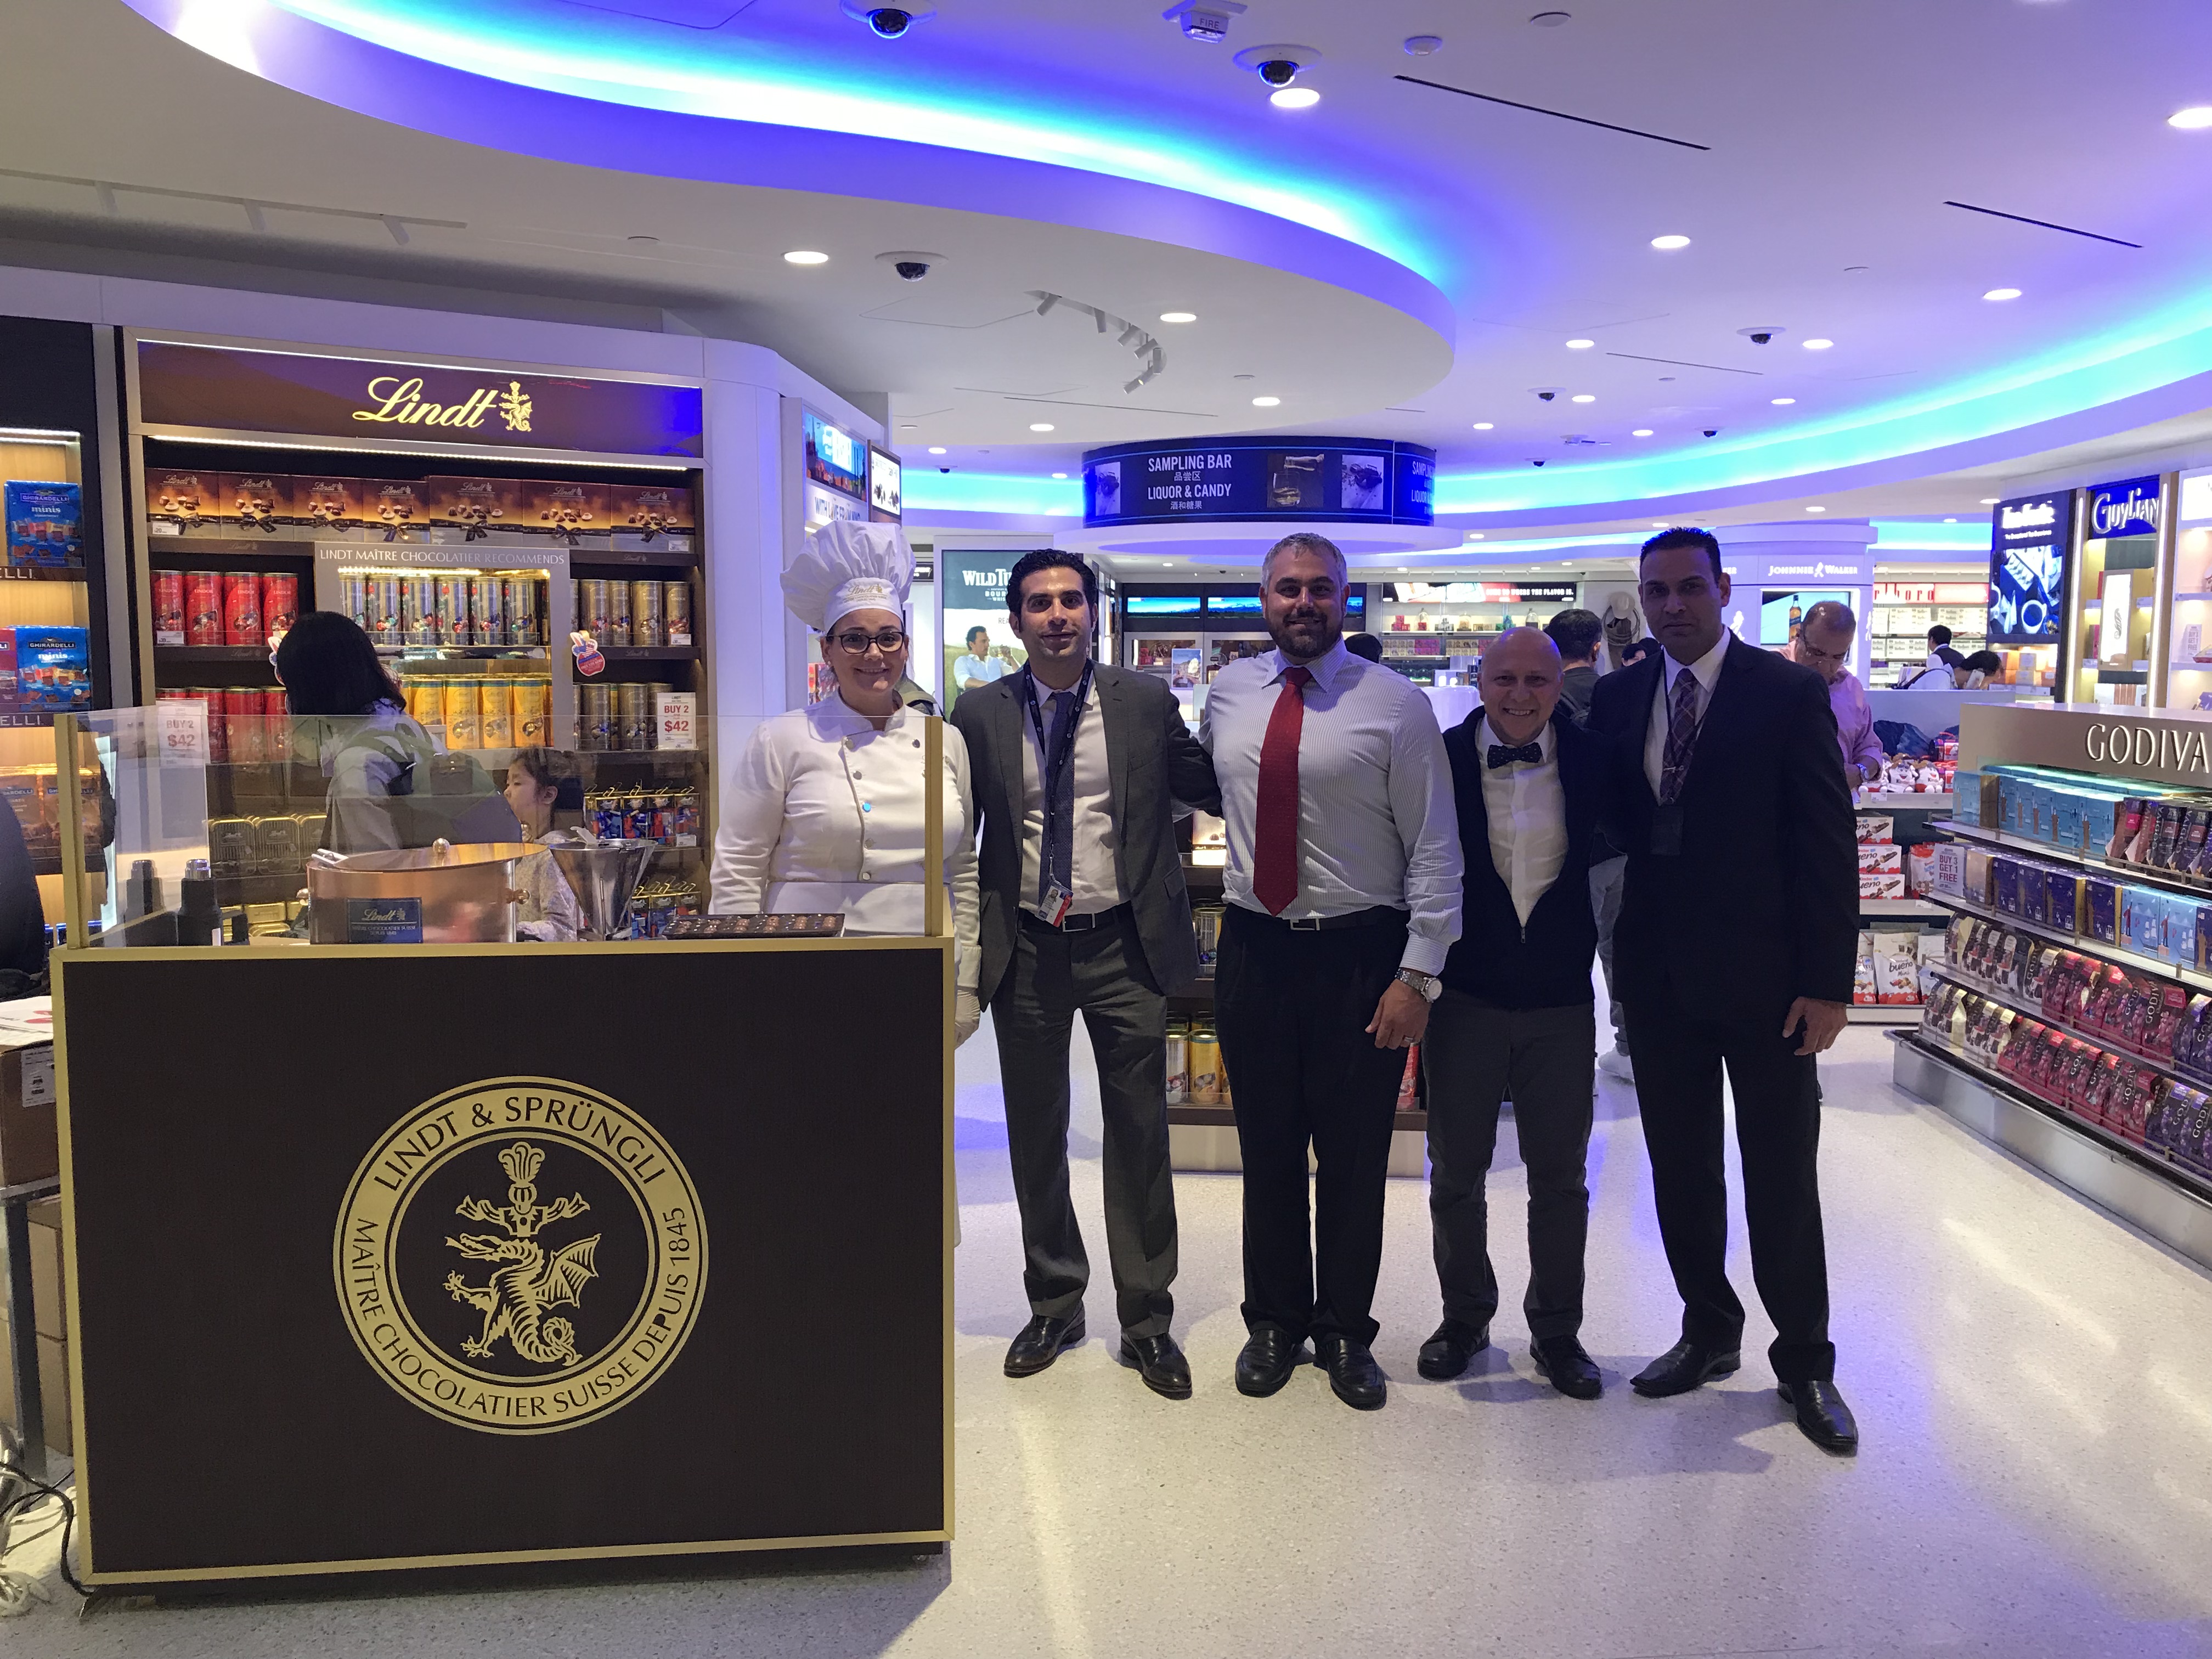 LINDT brings “magical moments” to travellers at new JFK Terminal One store